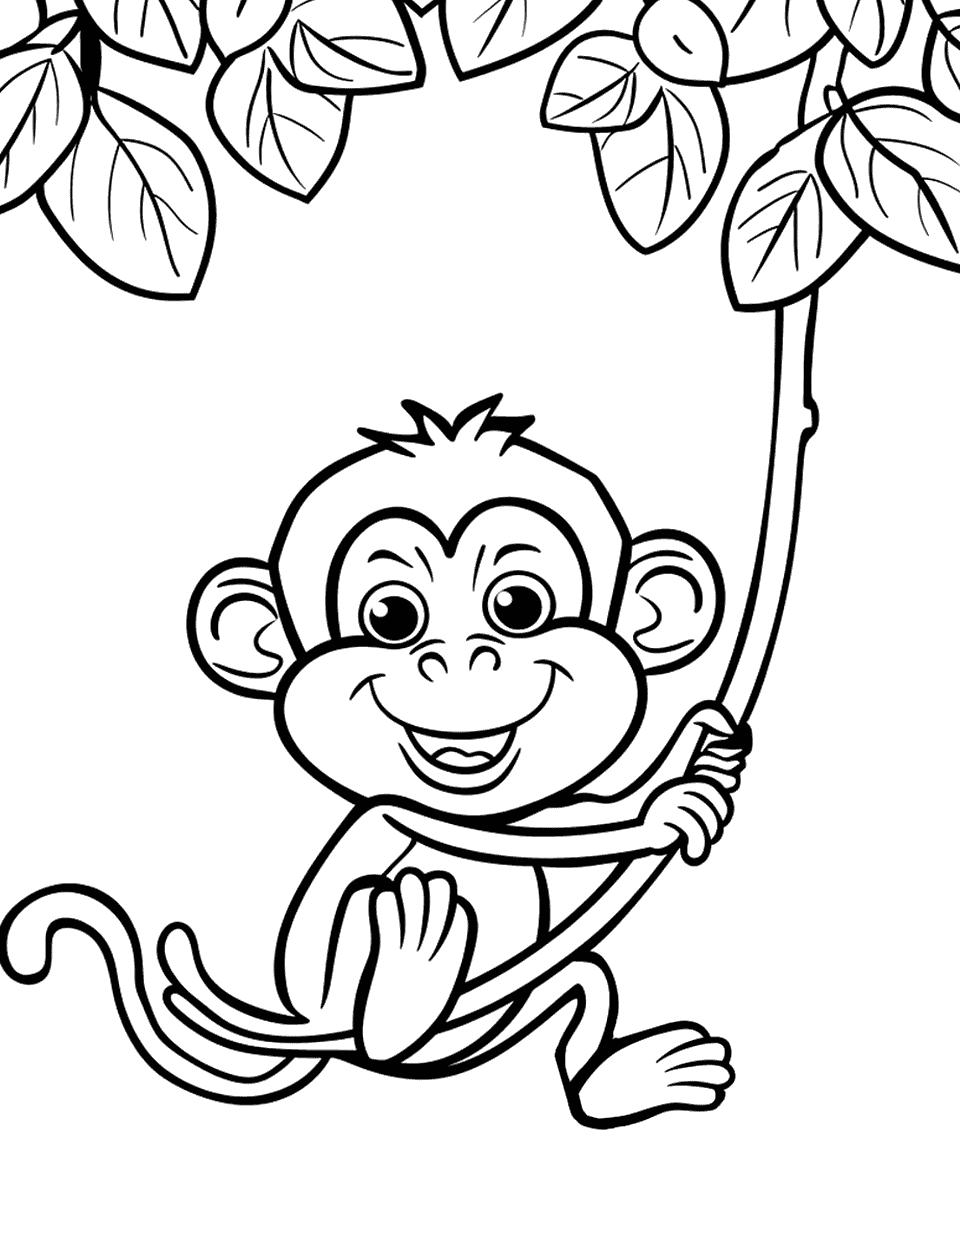 Jungle Monkey Adventure Coloring Page - A lone monkey swinging from a vine in a simple jungle setting.